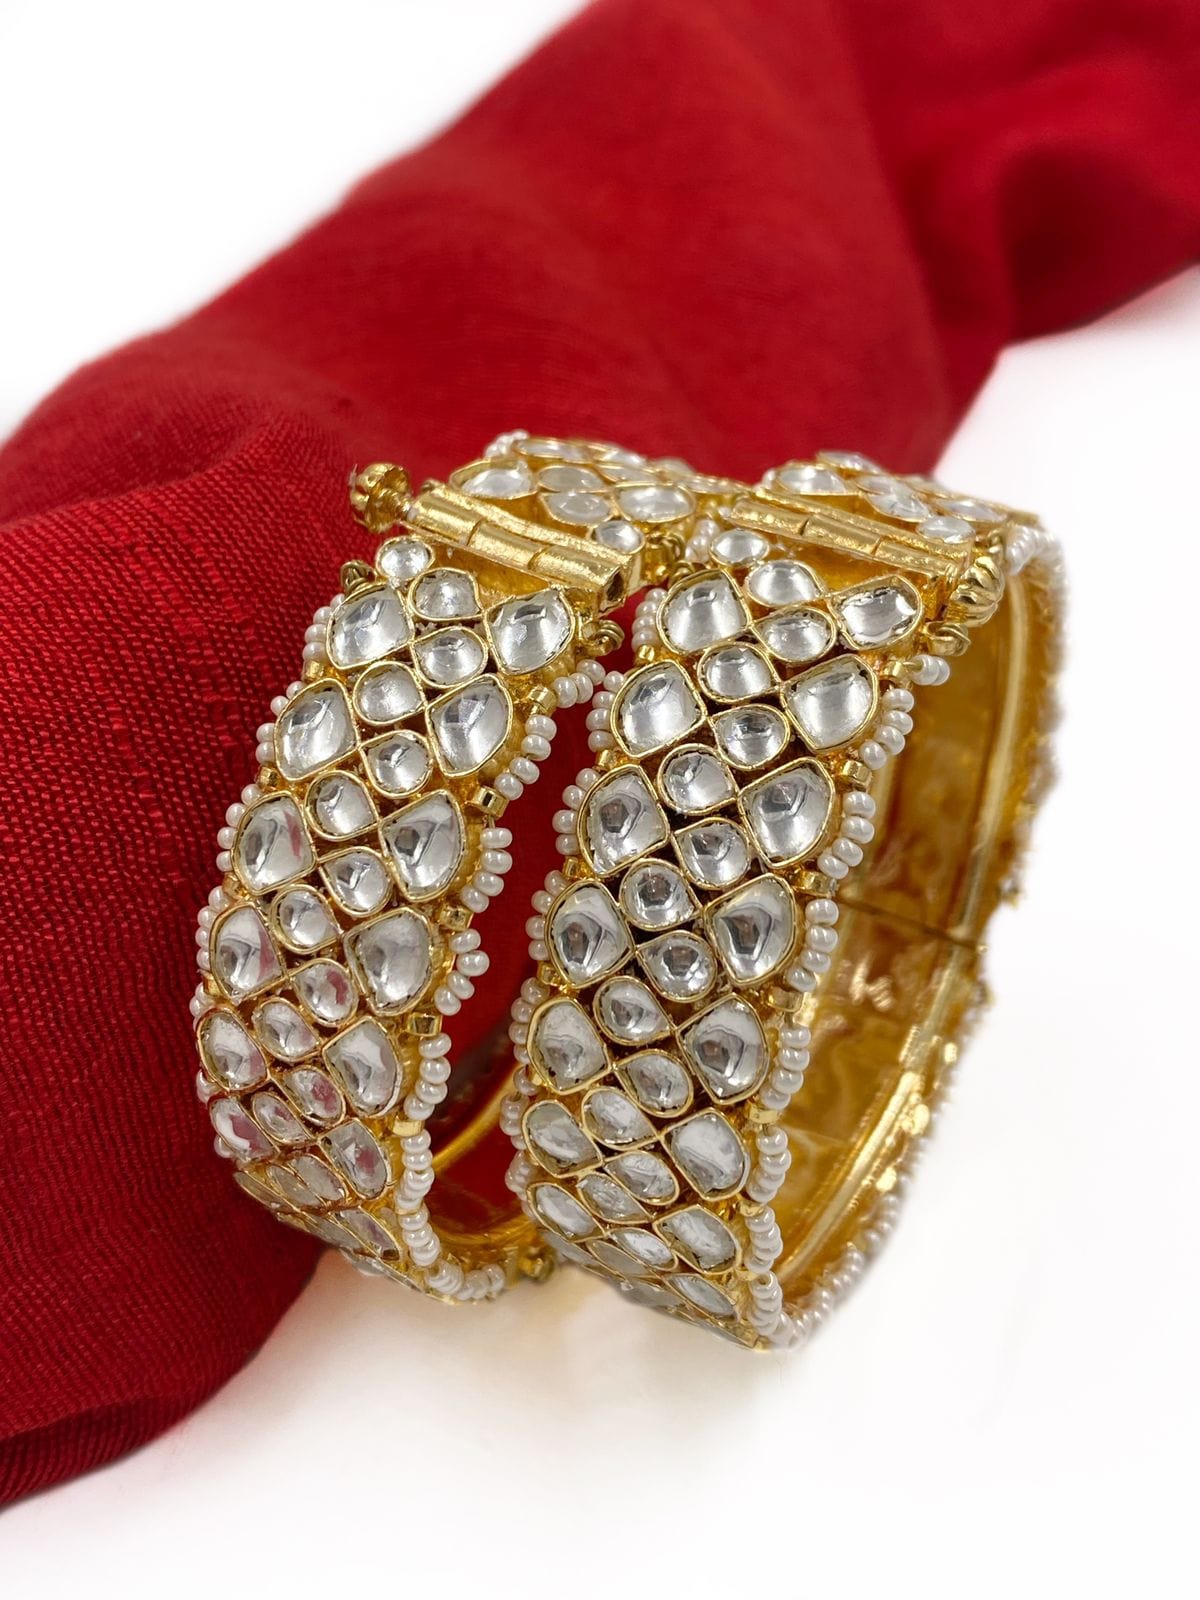 Gold Plated Jadau Kundan Bangles Handcrafted For Women By Gehna Shop Bangles